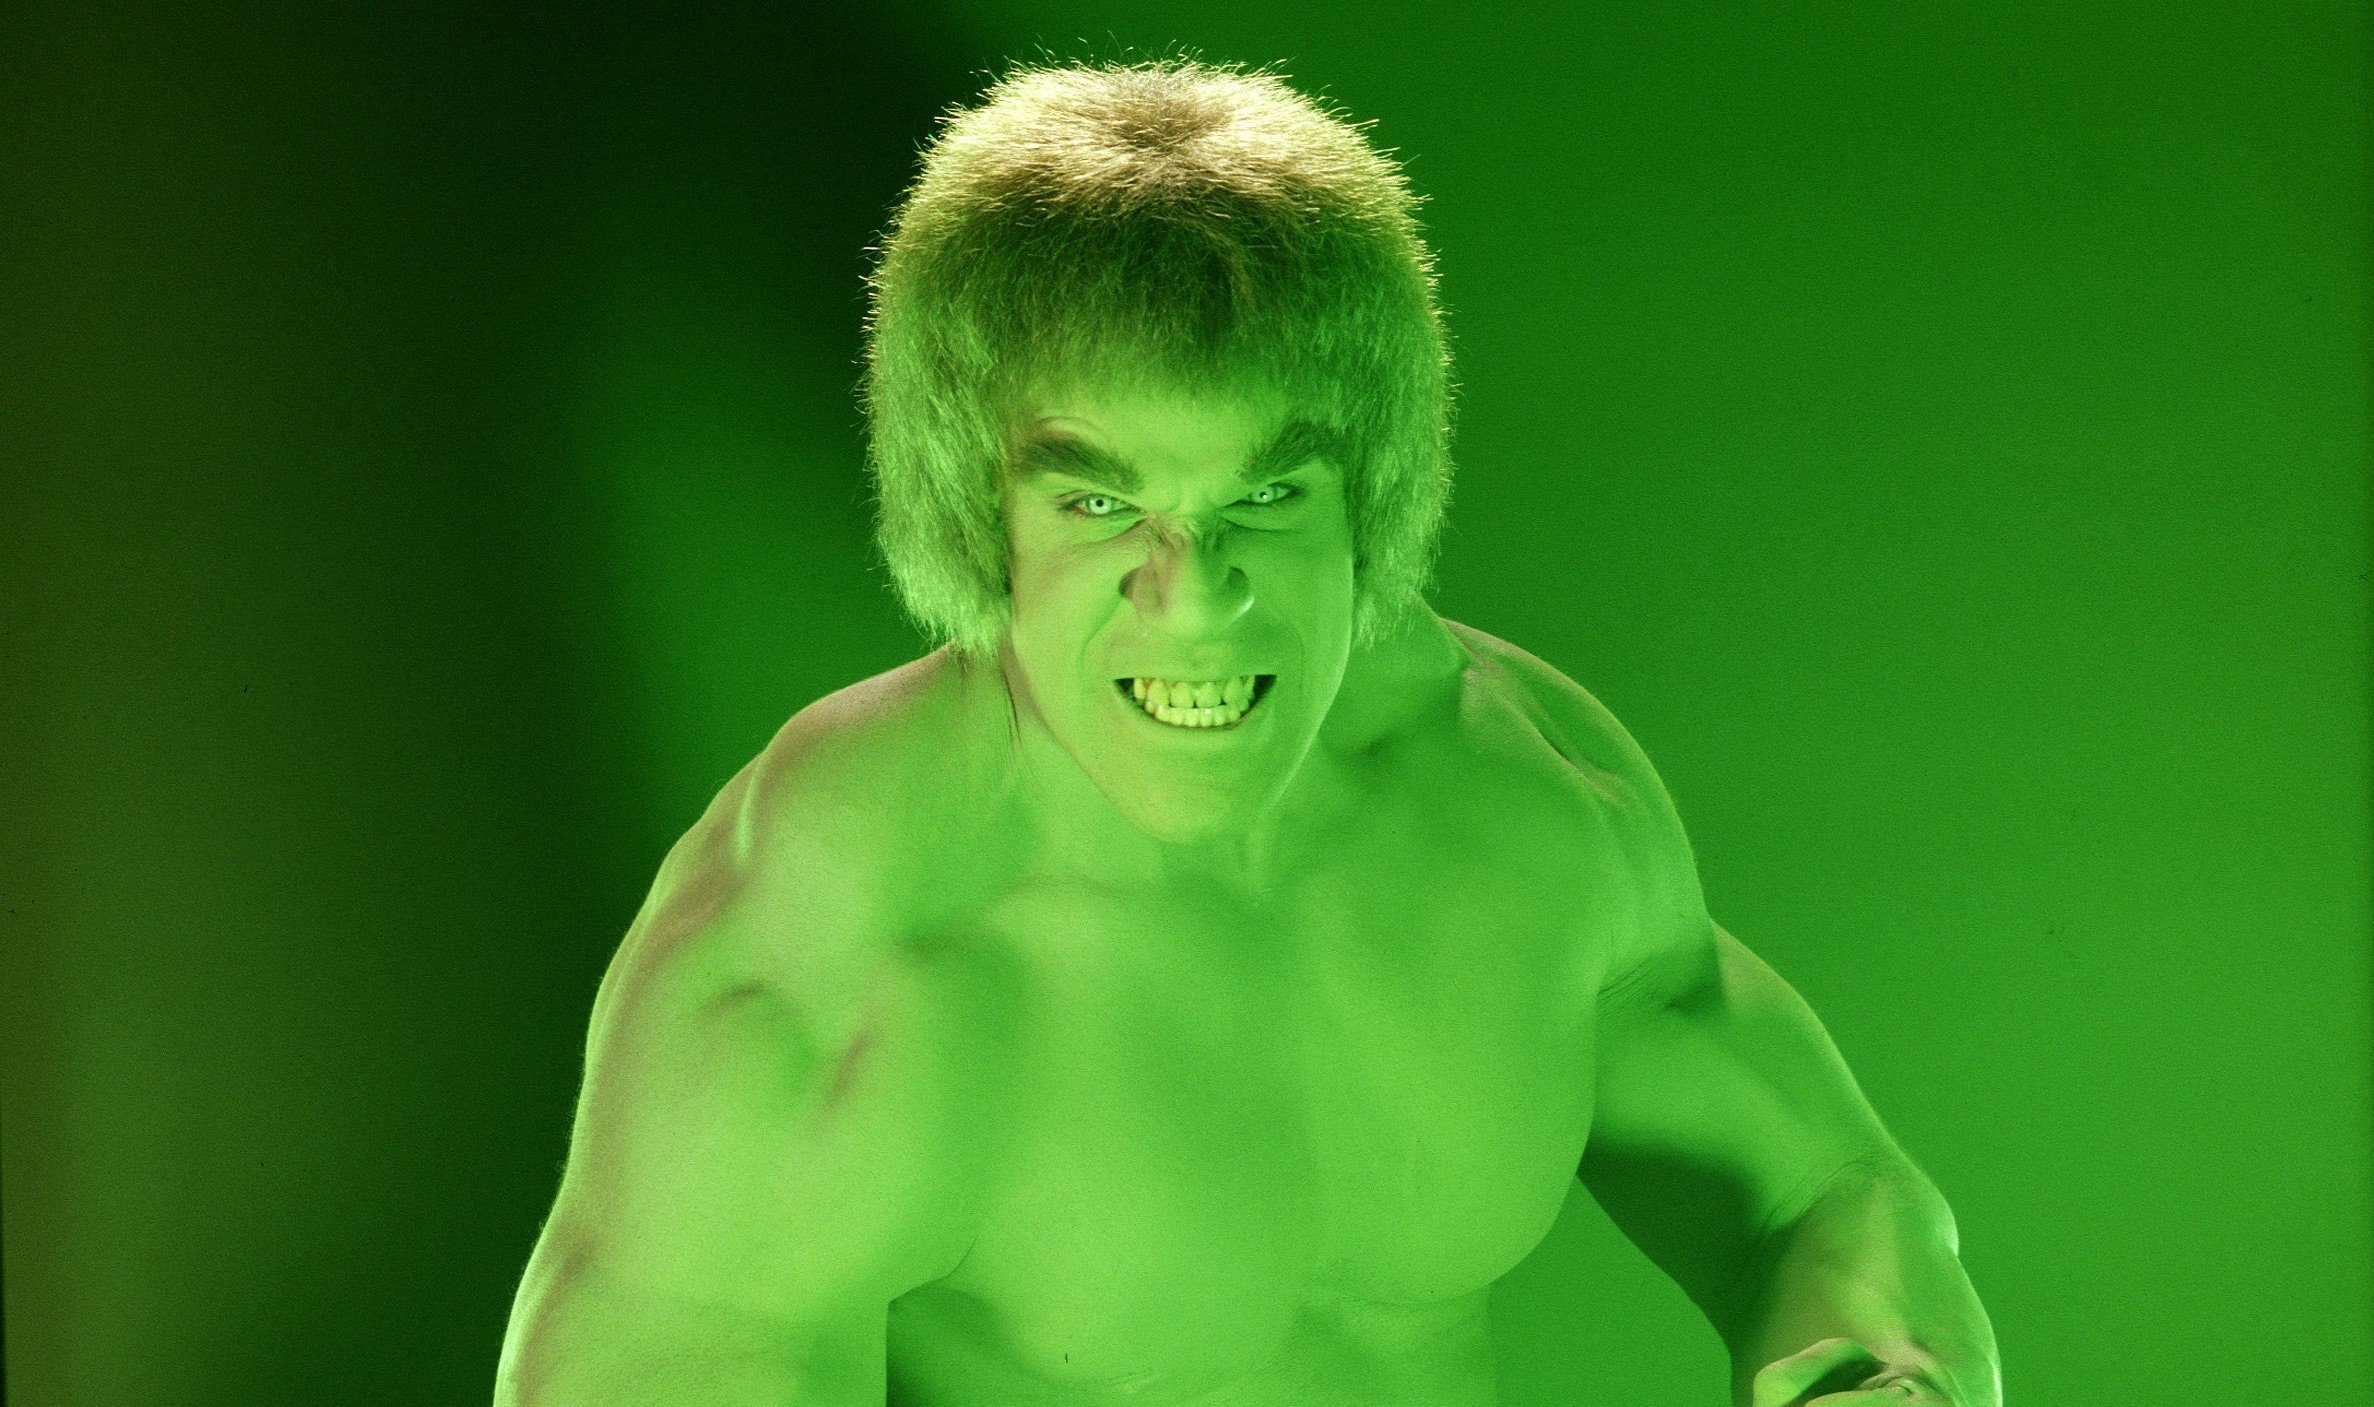 Lou Ferrigno in green paint as The Incredible Hulk